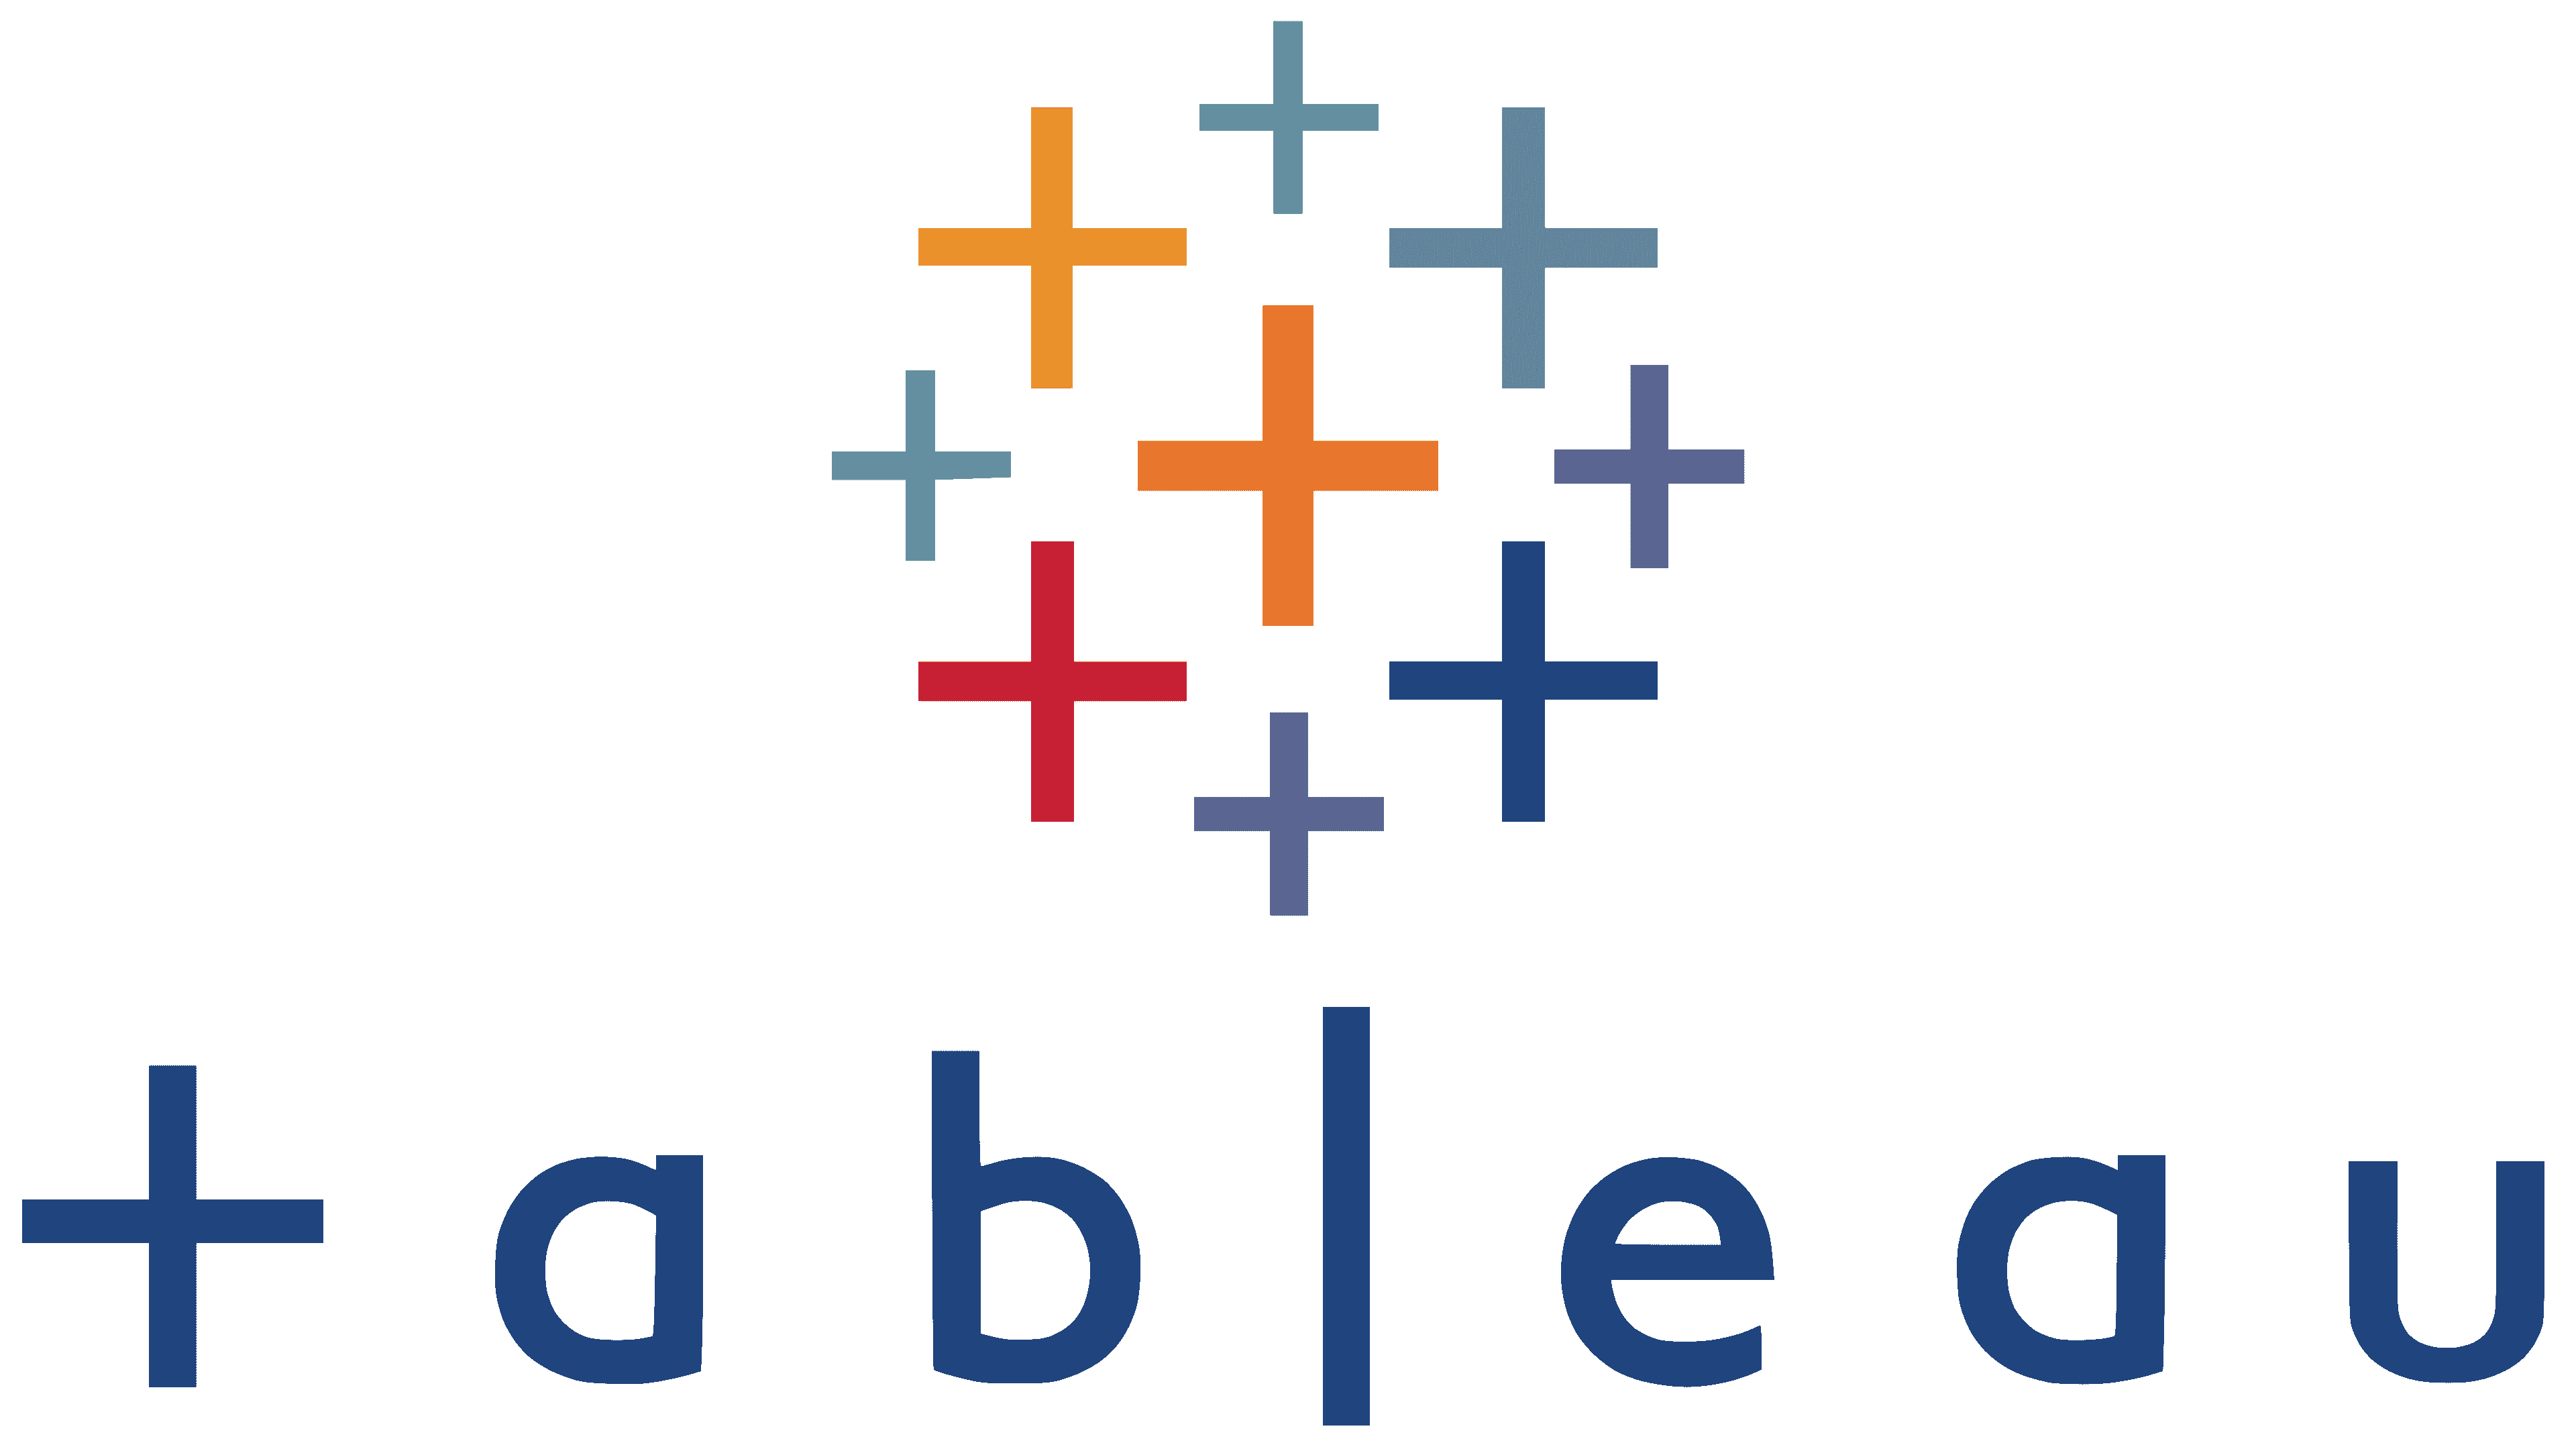 Get Started With Tableau